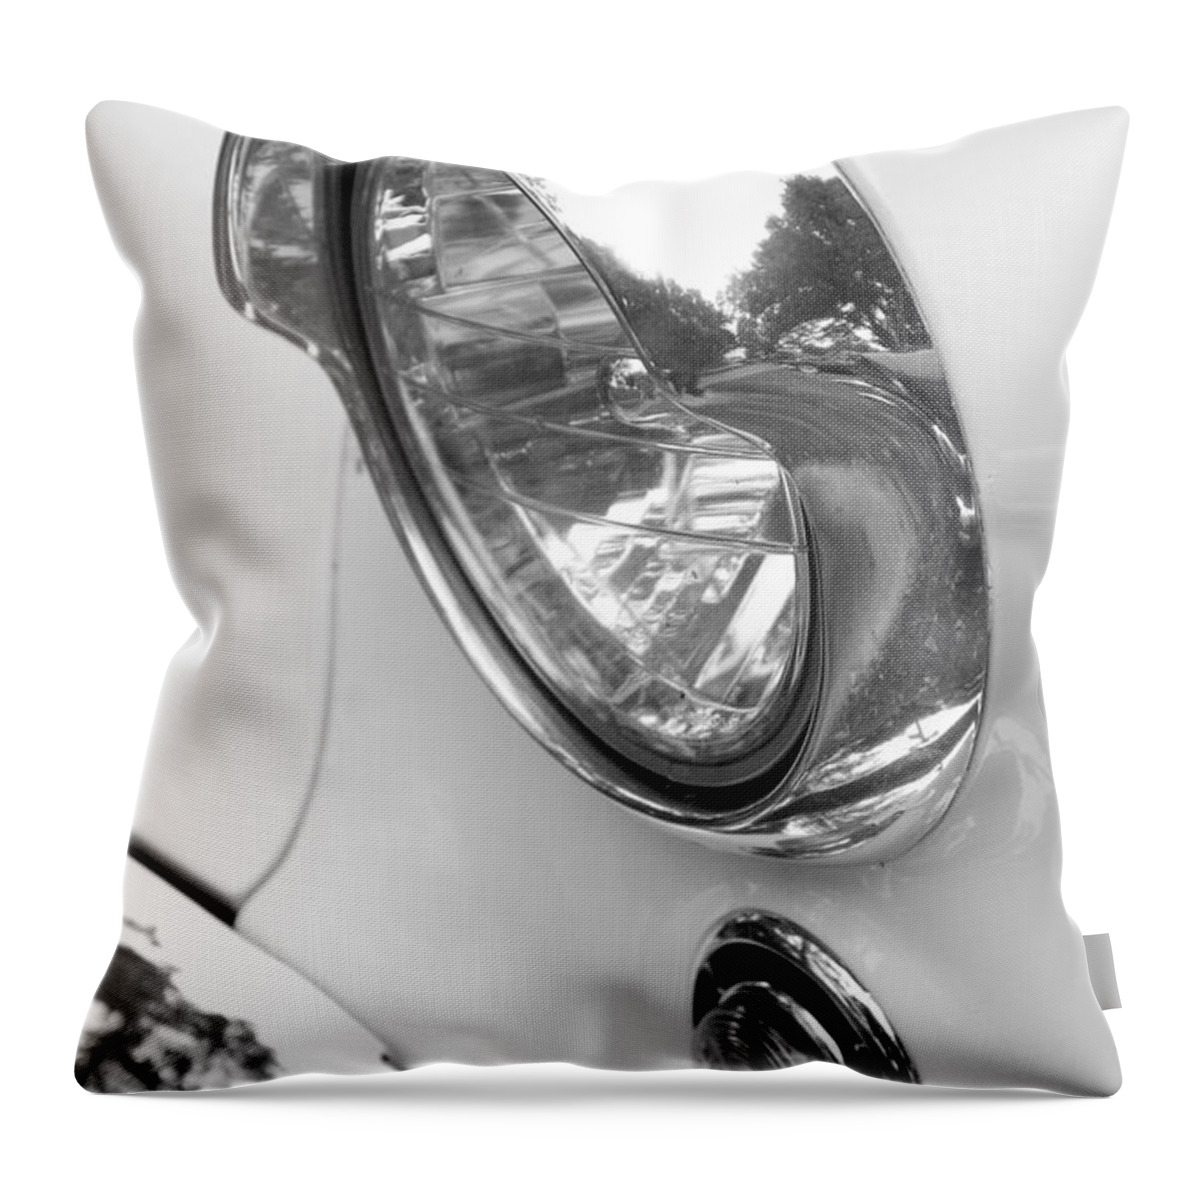 1955 Buick Special Photographs Throw Pillow featuring the photograph 1955 Buick Special Headlight by Brooke Roby